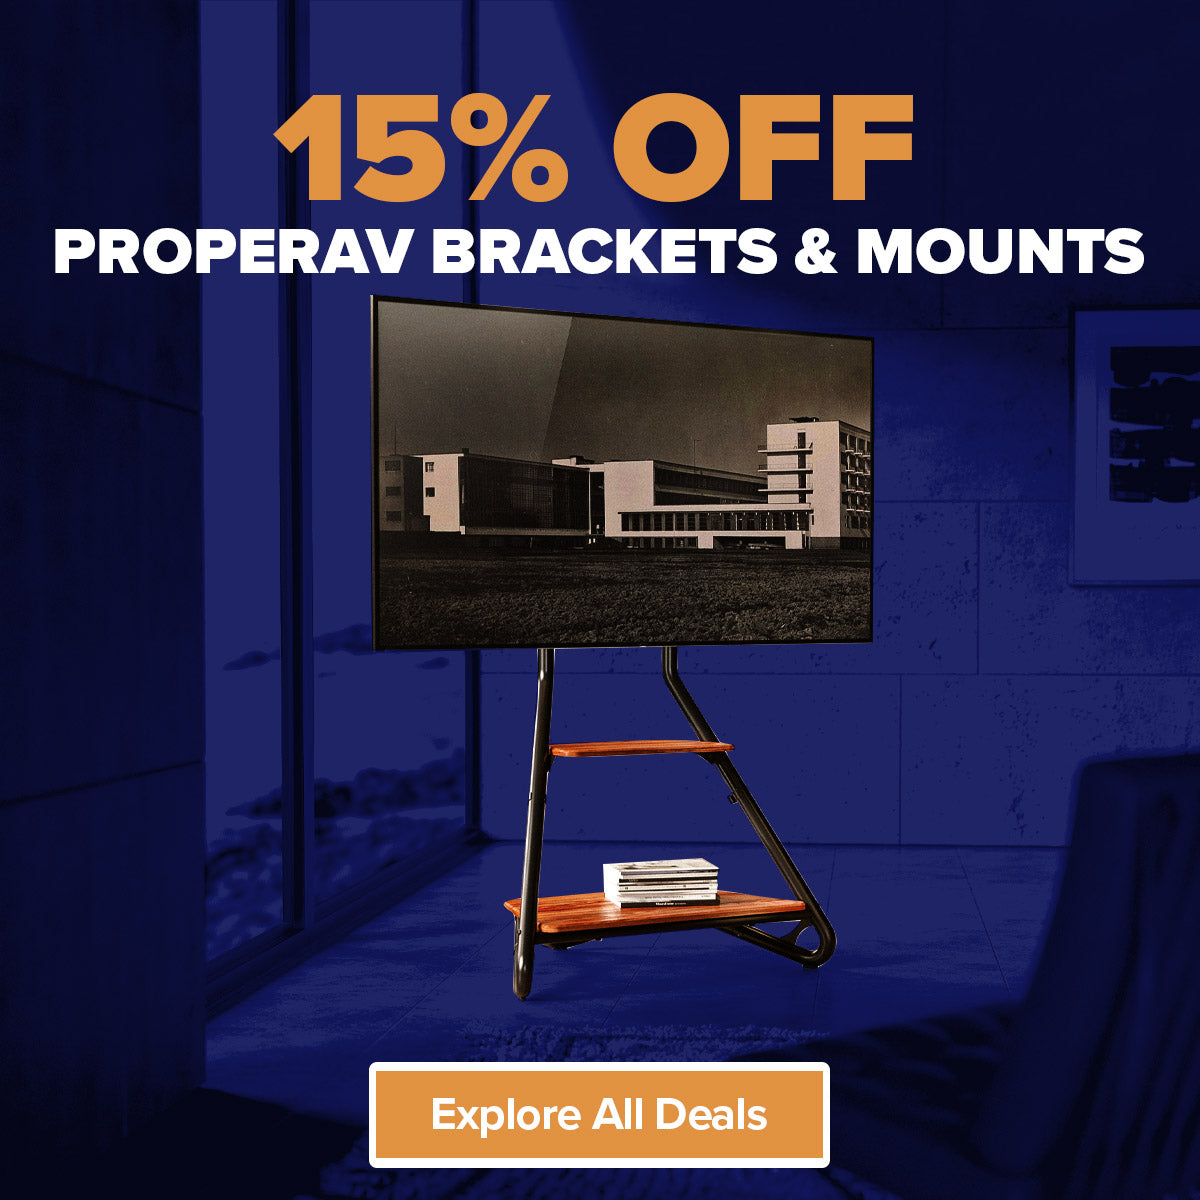 Save 15% off TV brackets & monitor mounts with Maplin's January Sale deals!